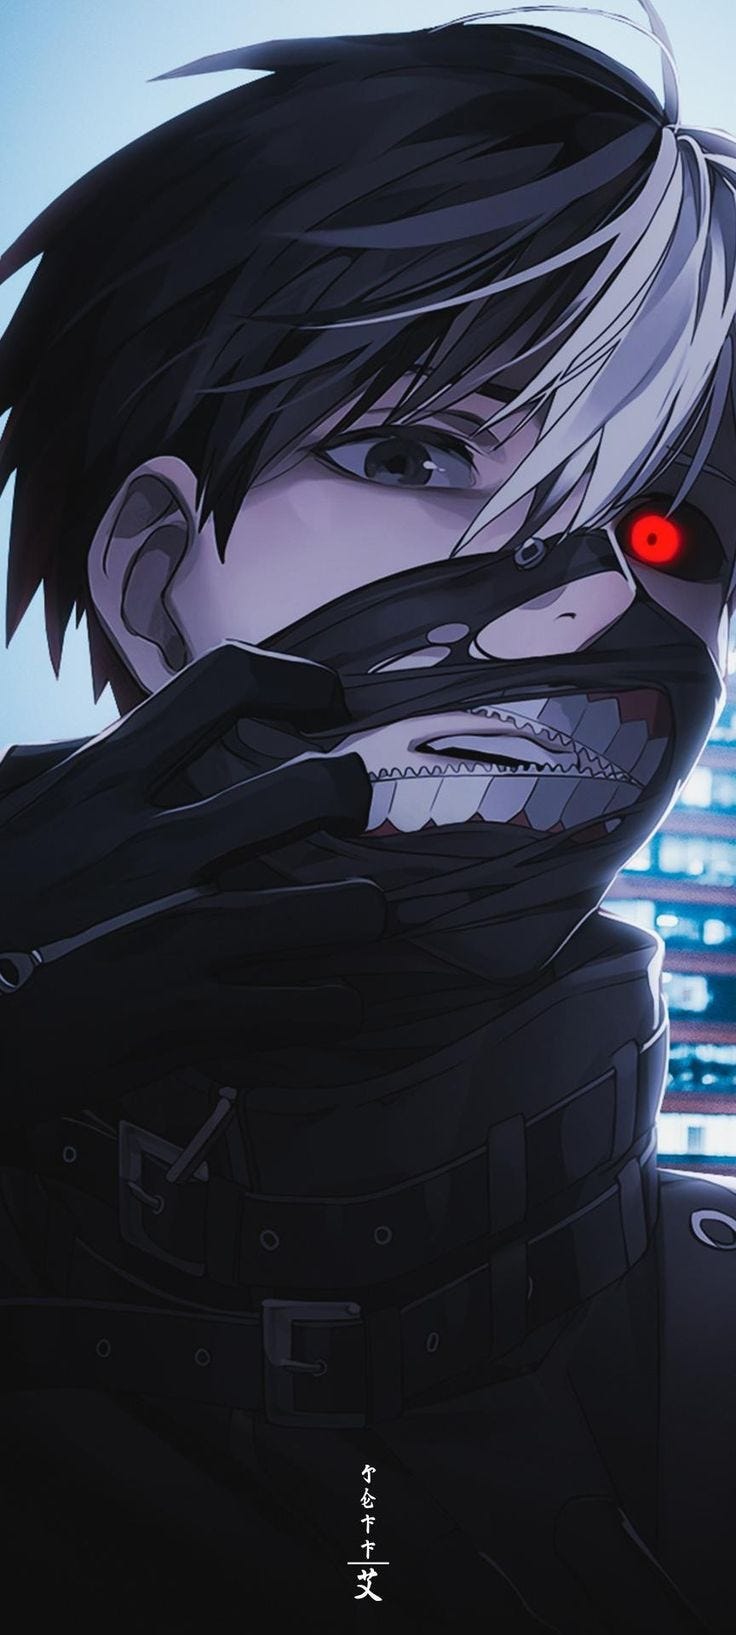 Tokyo Ghoul: Reasons Anime-Only Fans Should Read The Manga